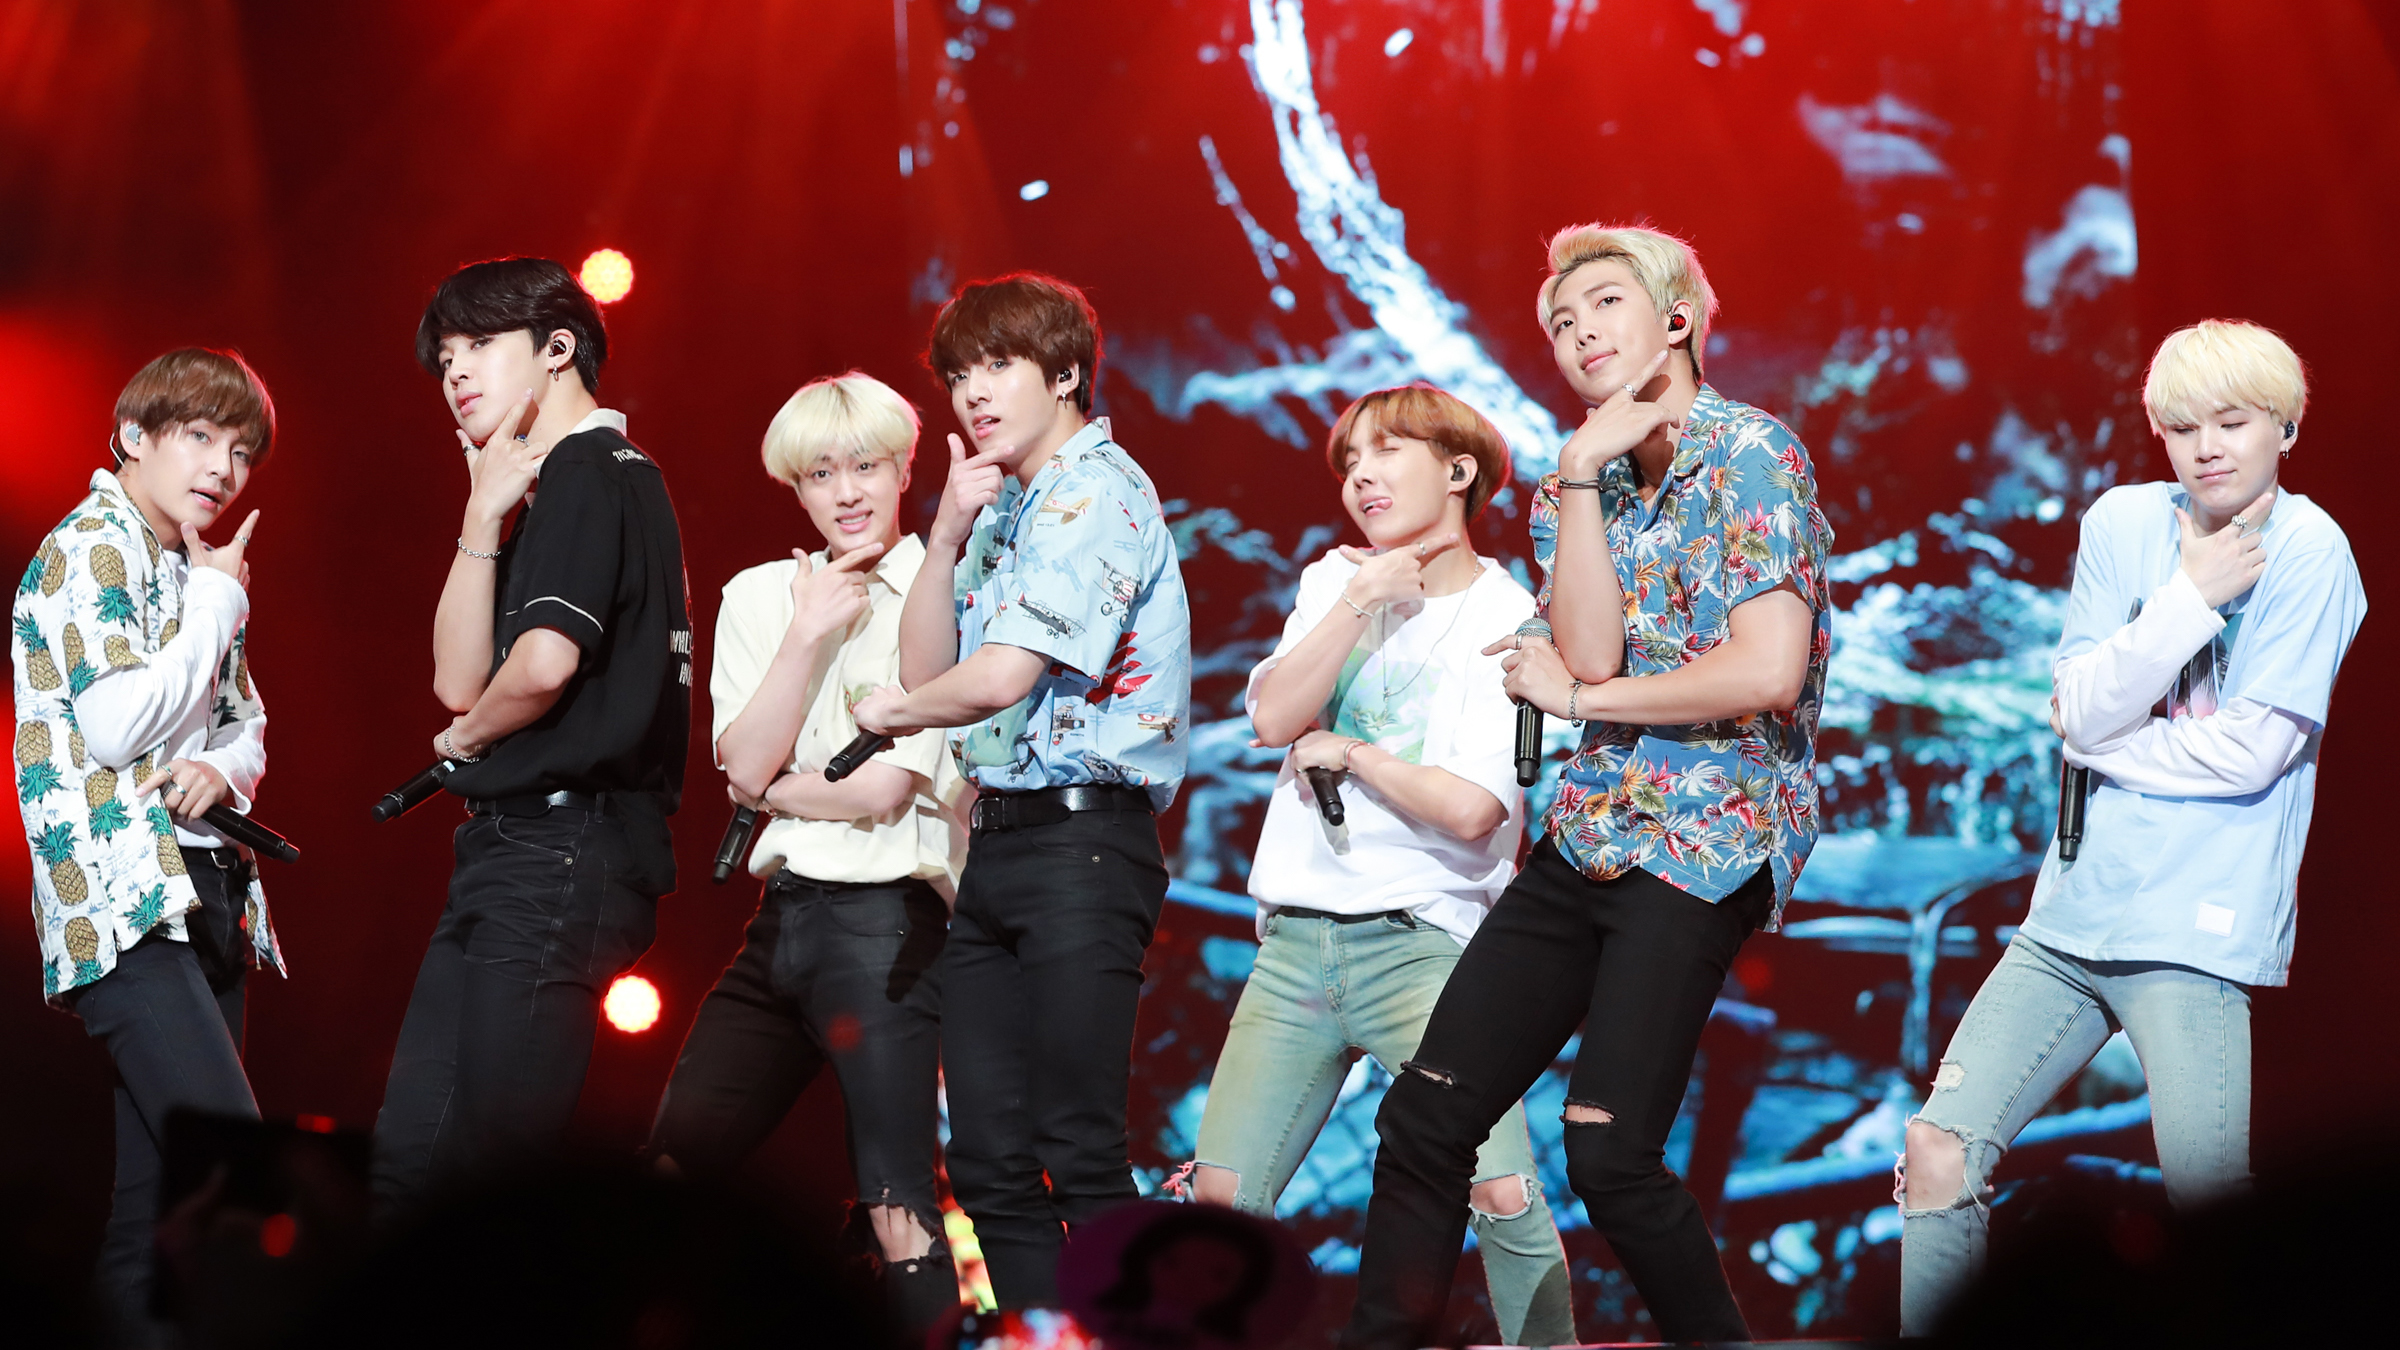 bts wallpaper hd,performance,entertainment,event,performing arts,social group